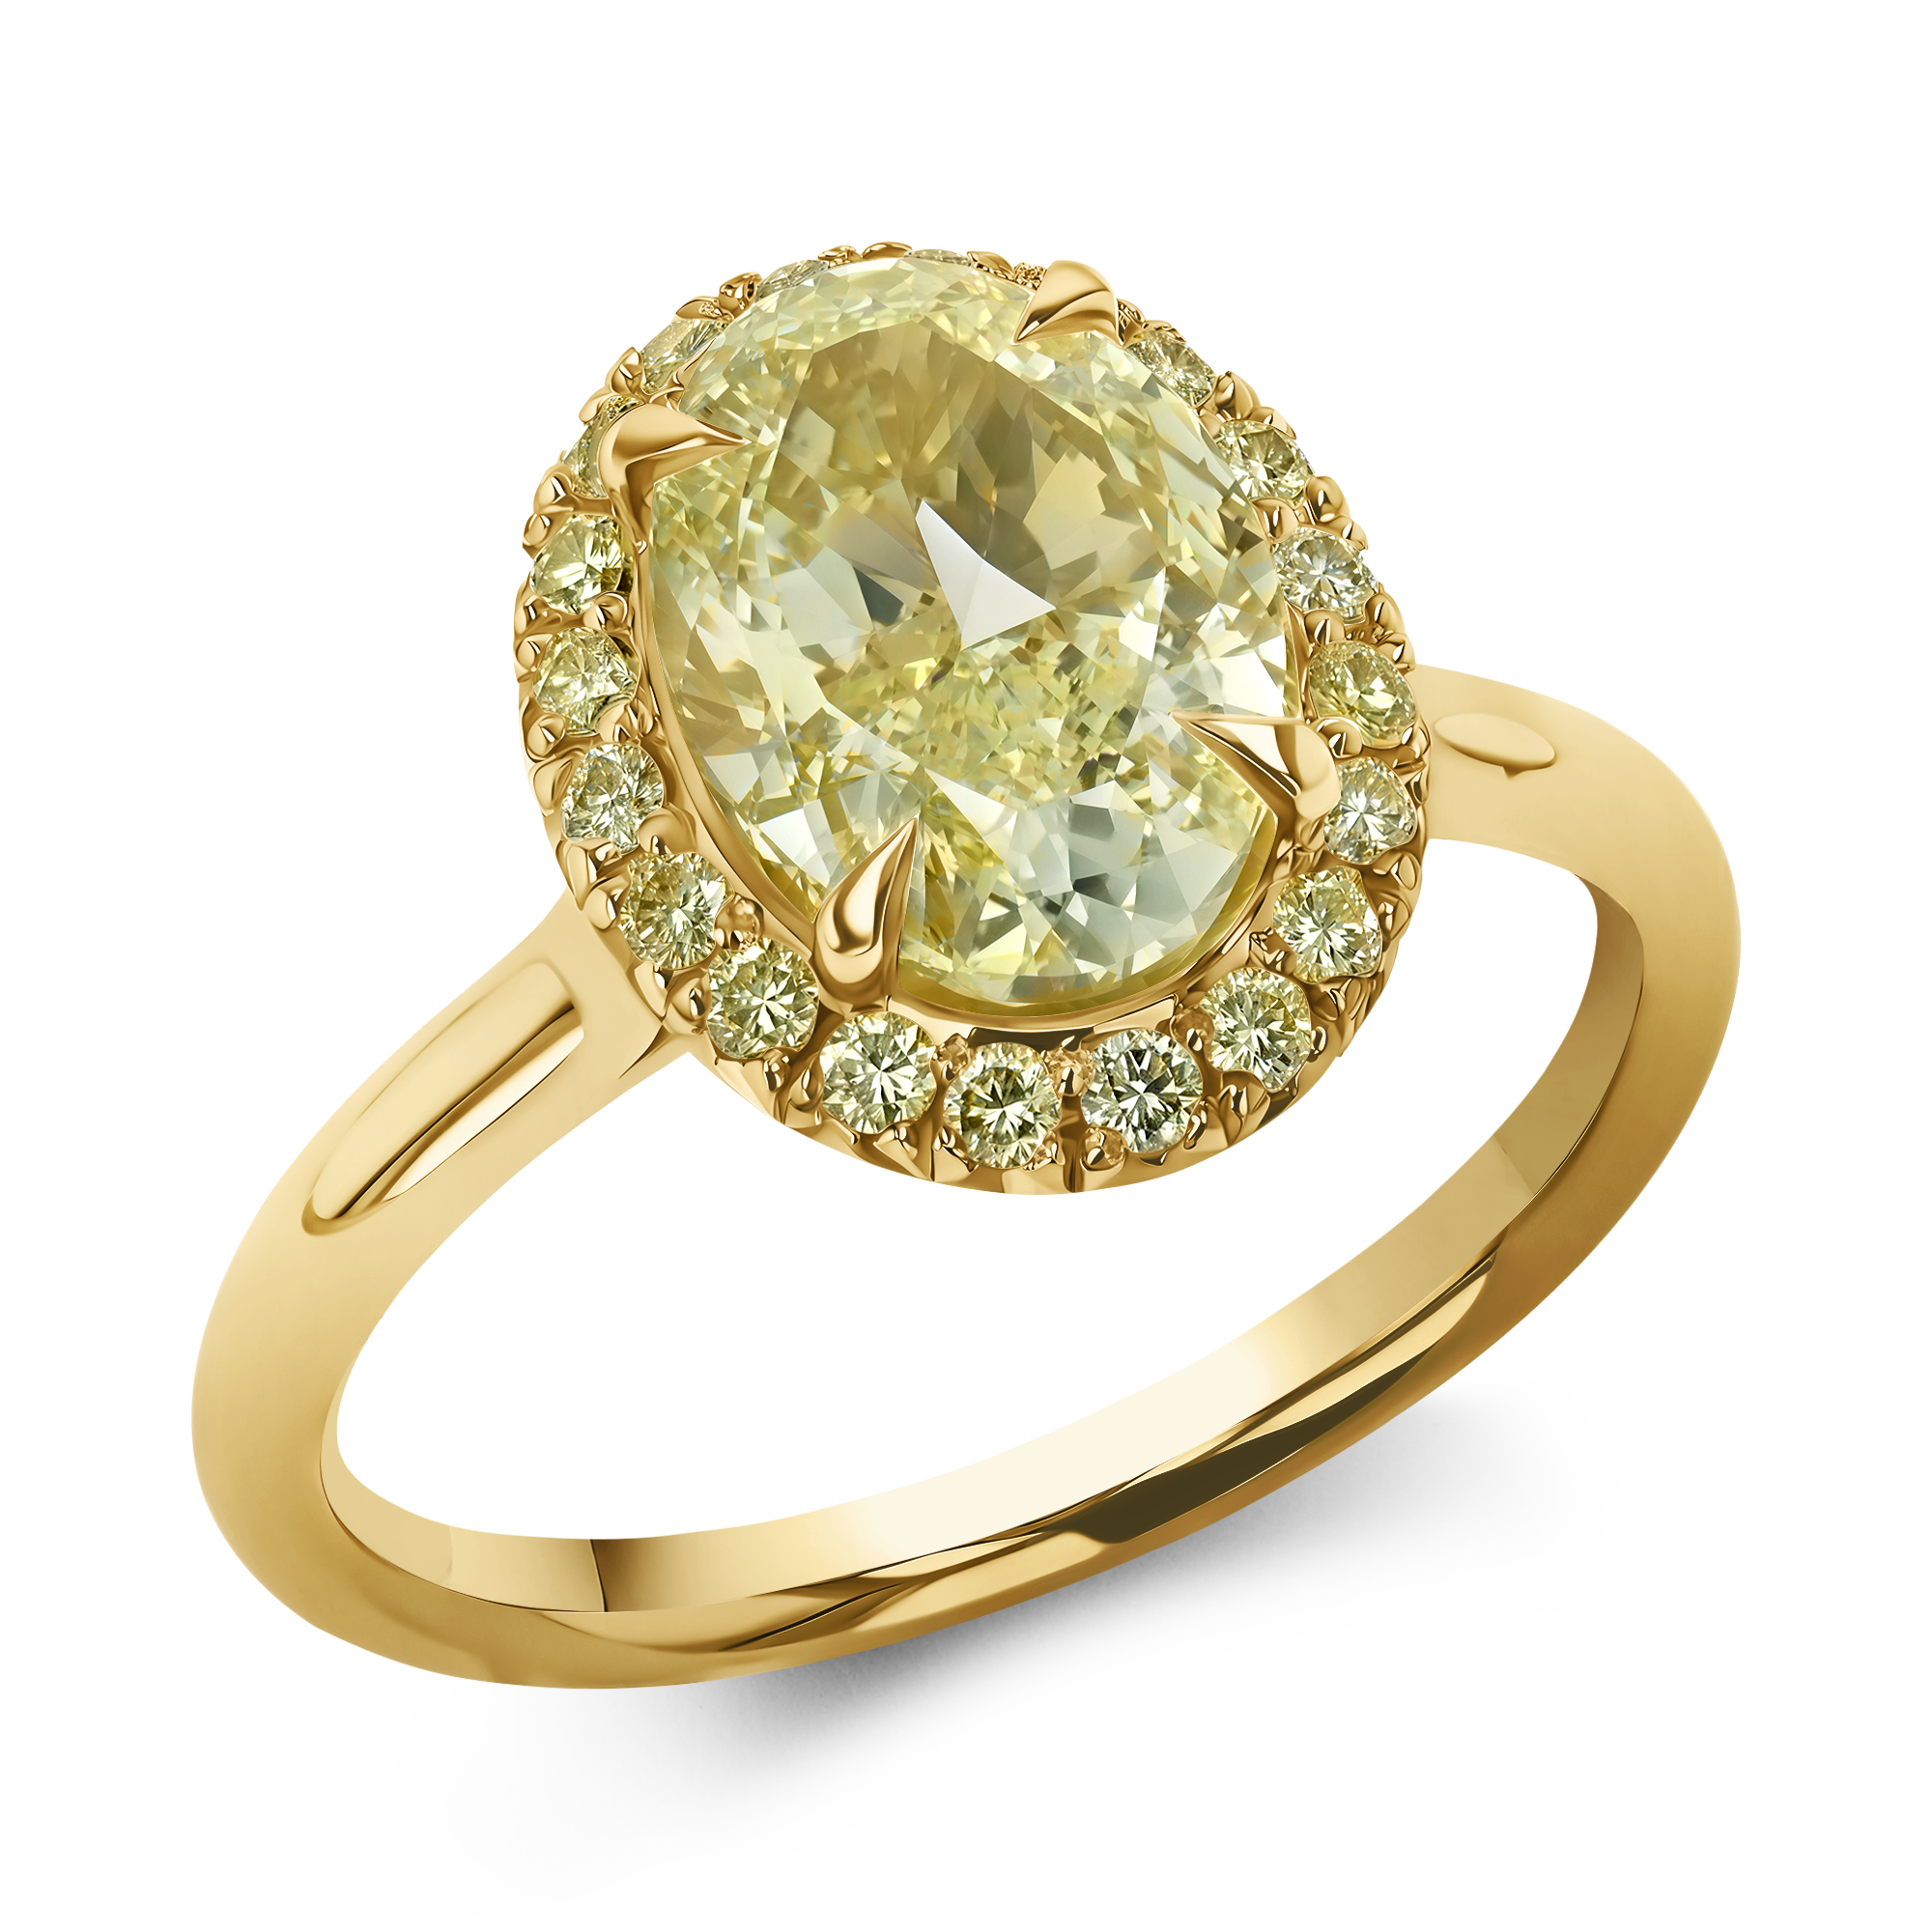 Celestial 3.01ct Fancy Yellow Diamond Cluster Ring Oval Cut, Claw Set_1